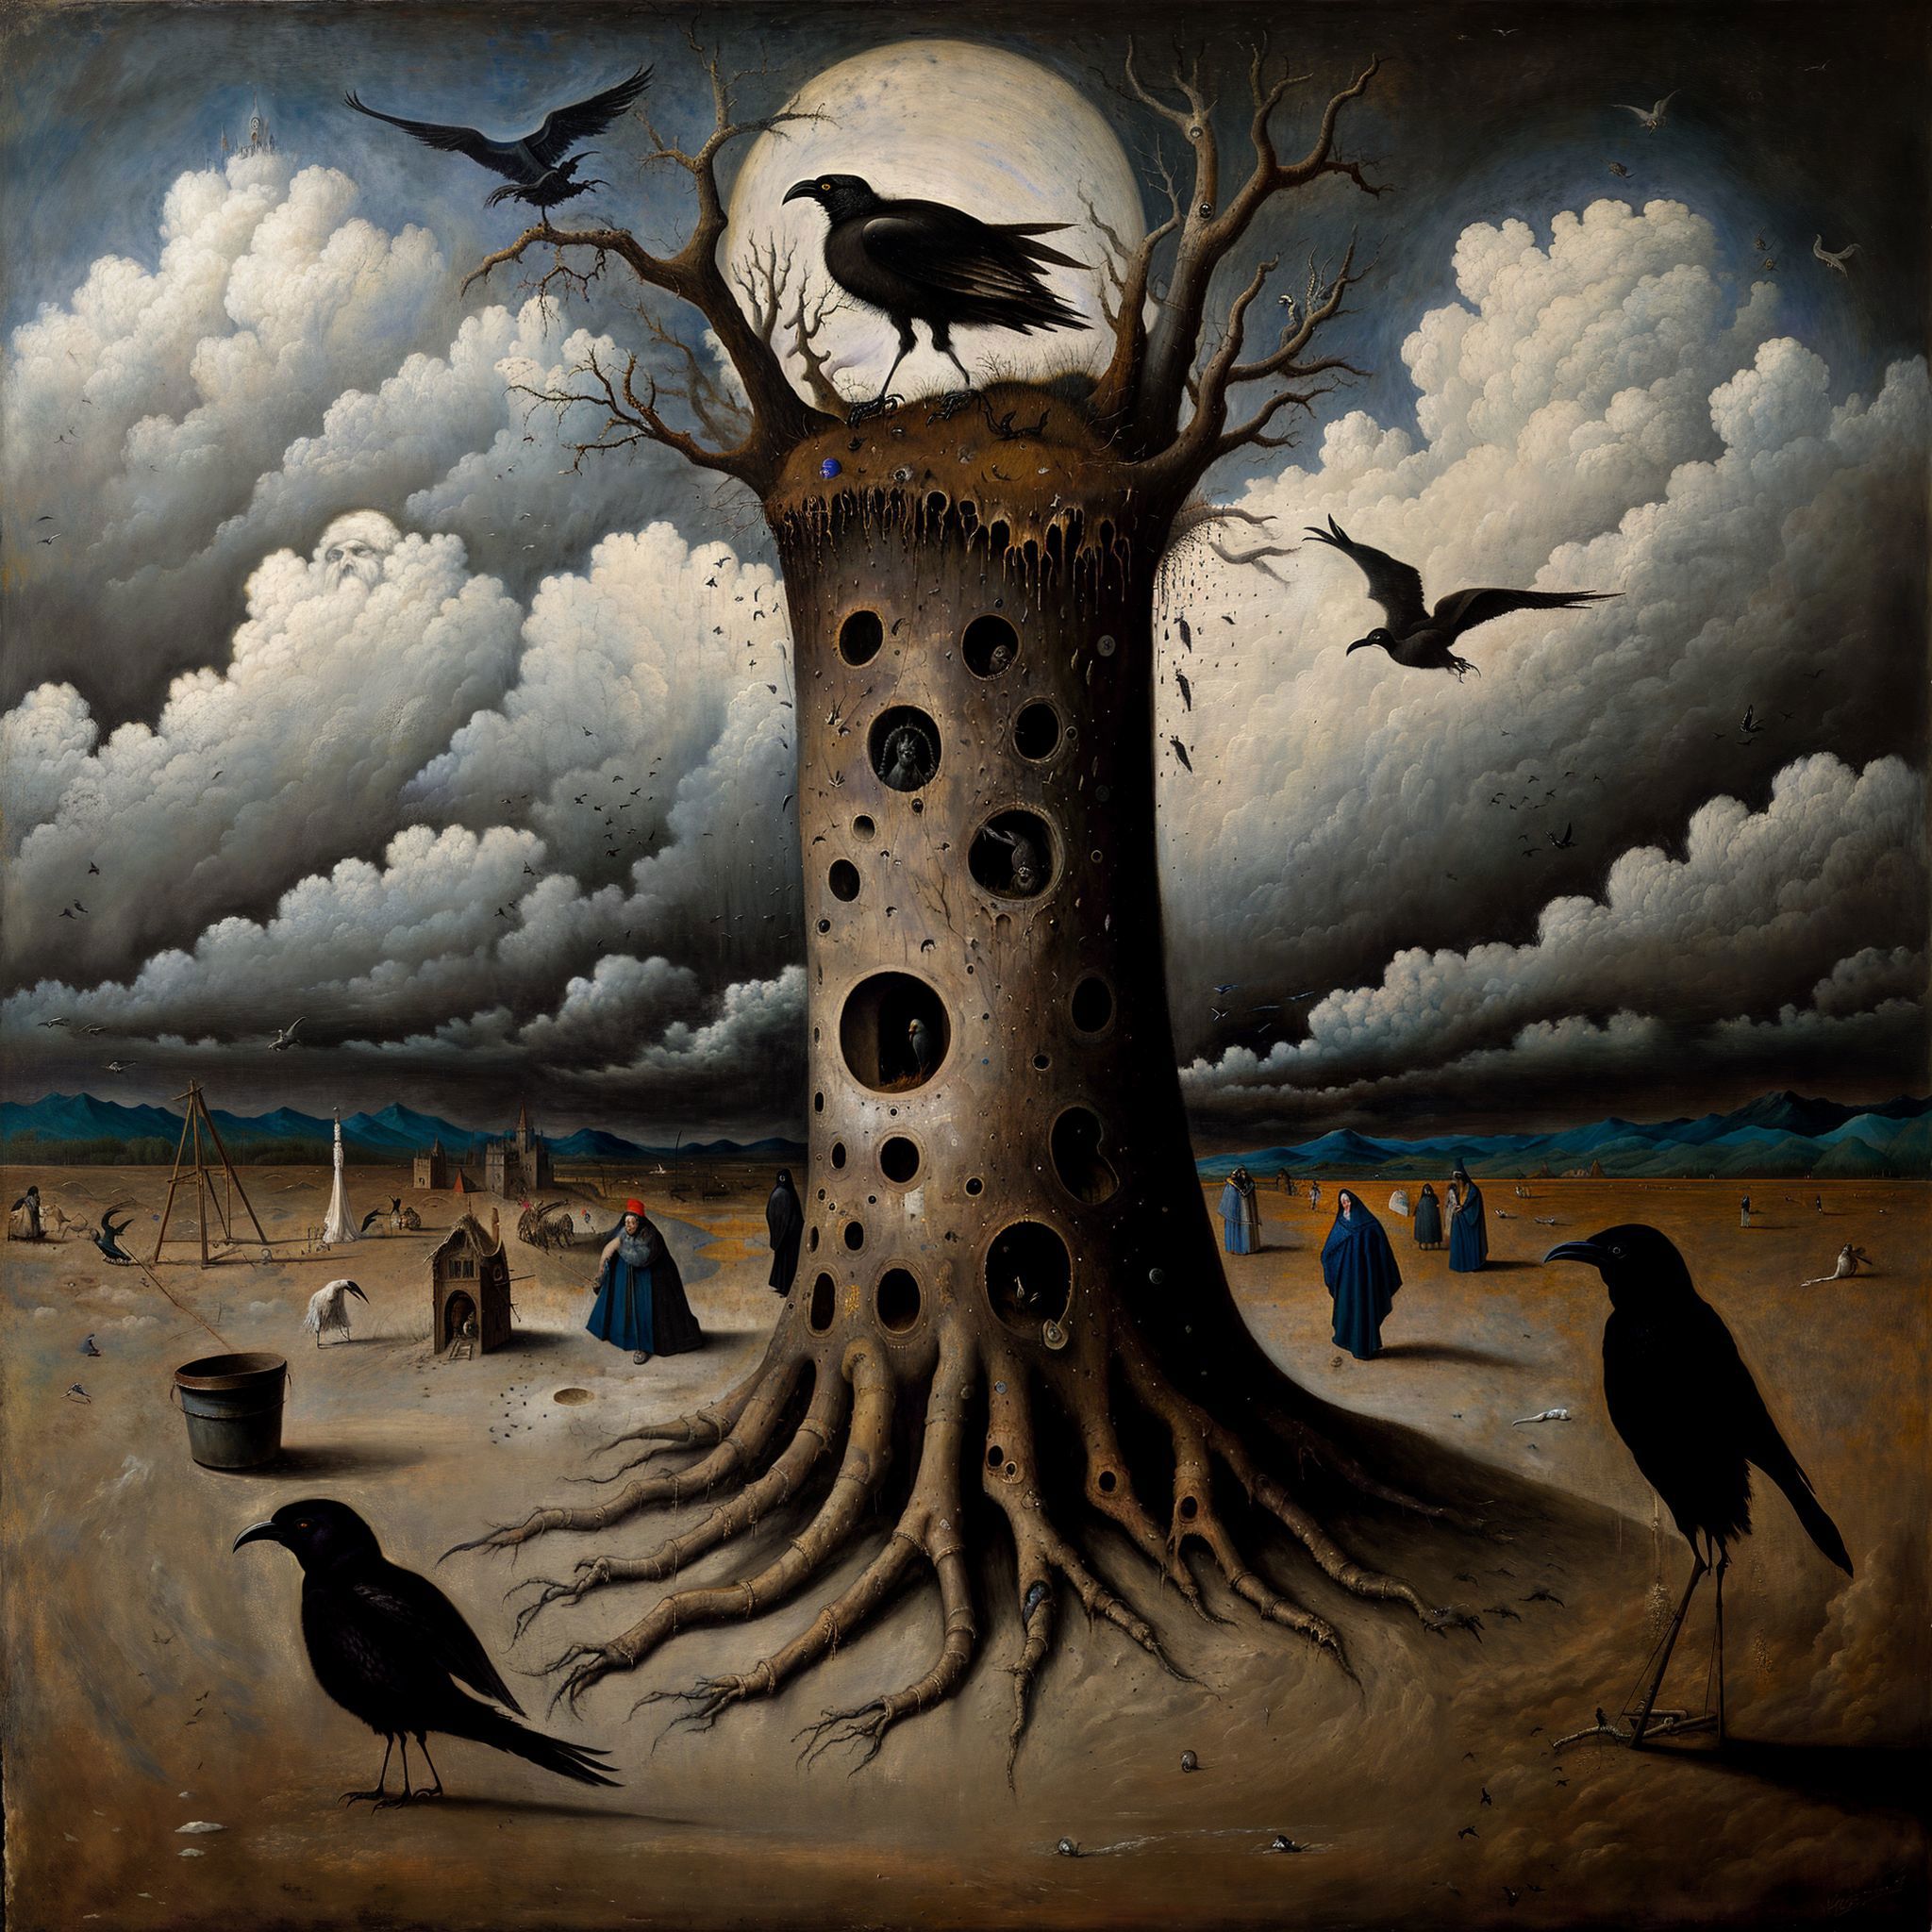 A painting of a tree with a bird perched on it, surrounded by black birds and a cloudy sky.